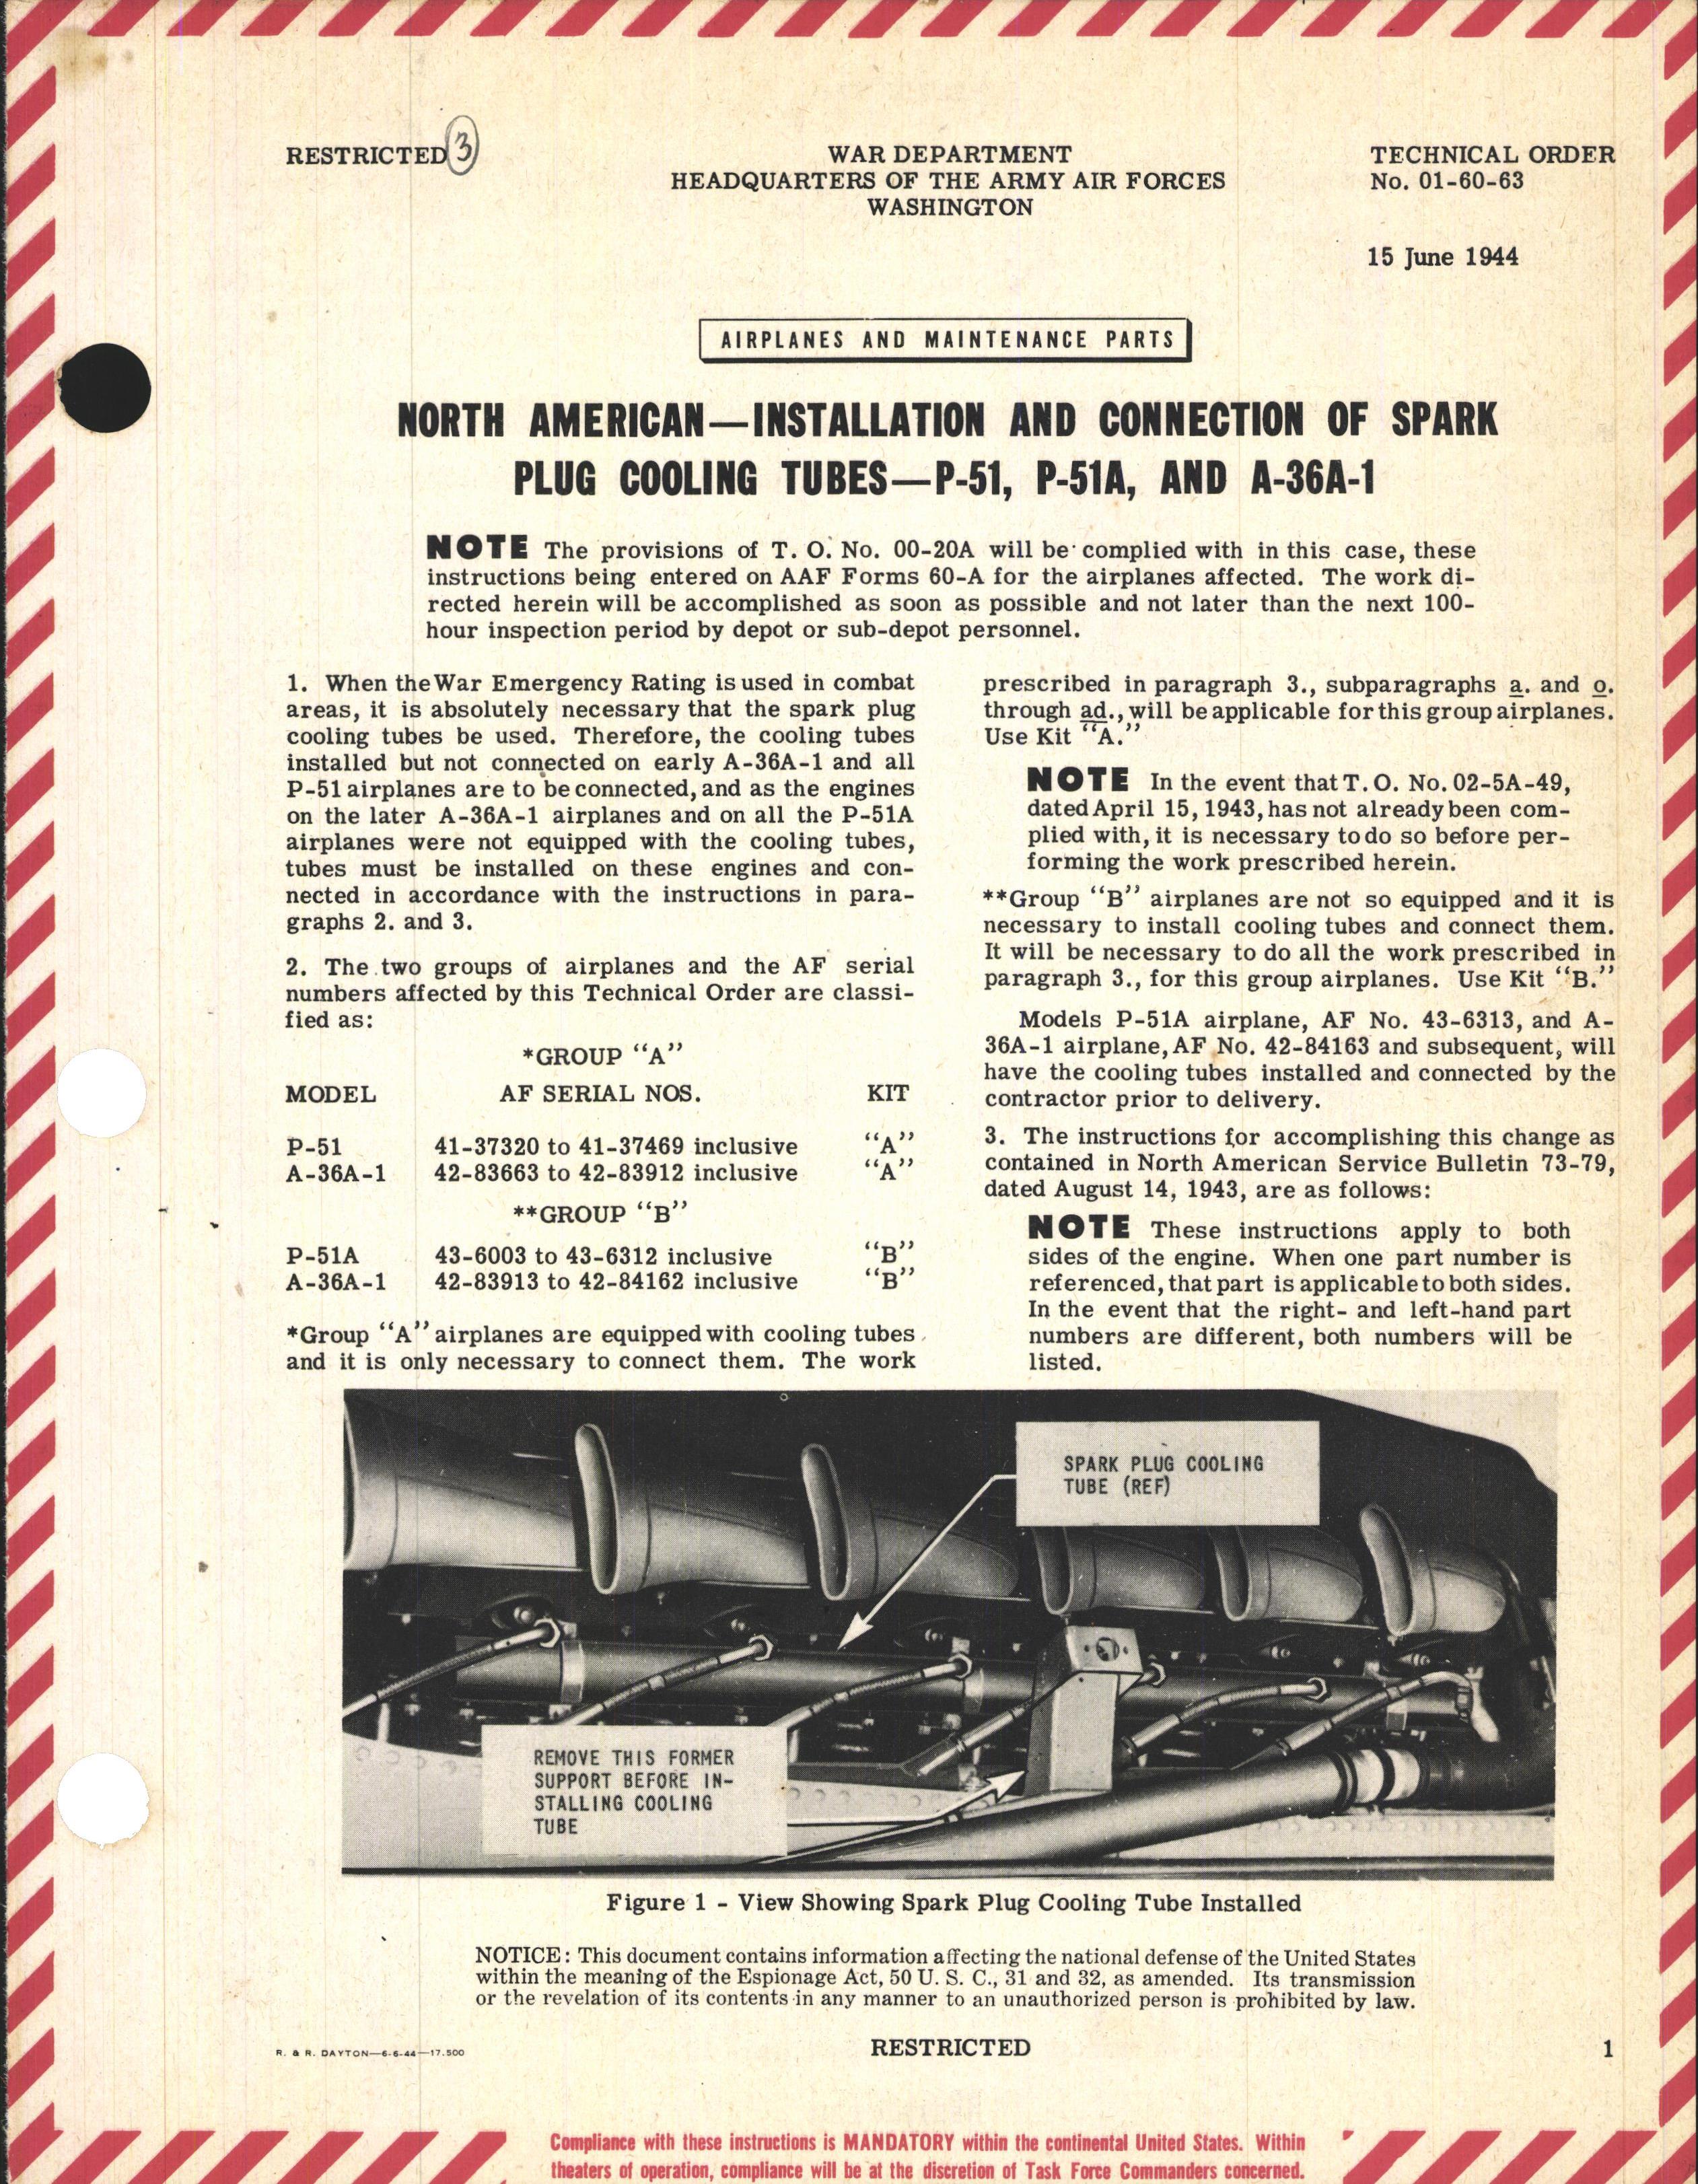 Sample page 1 from AirCorps Library document: Installation and Connection of Spark Plug Cooling Tubes